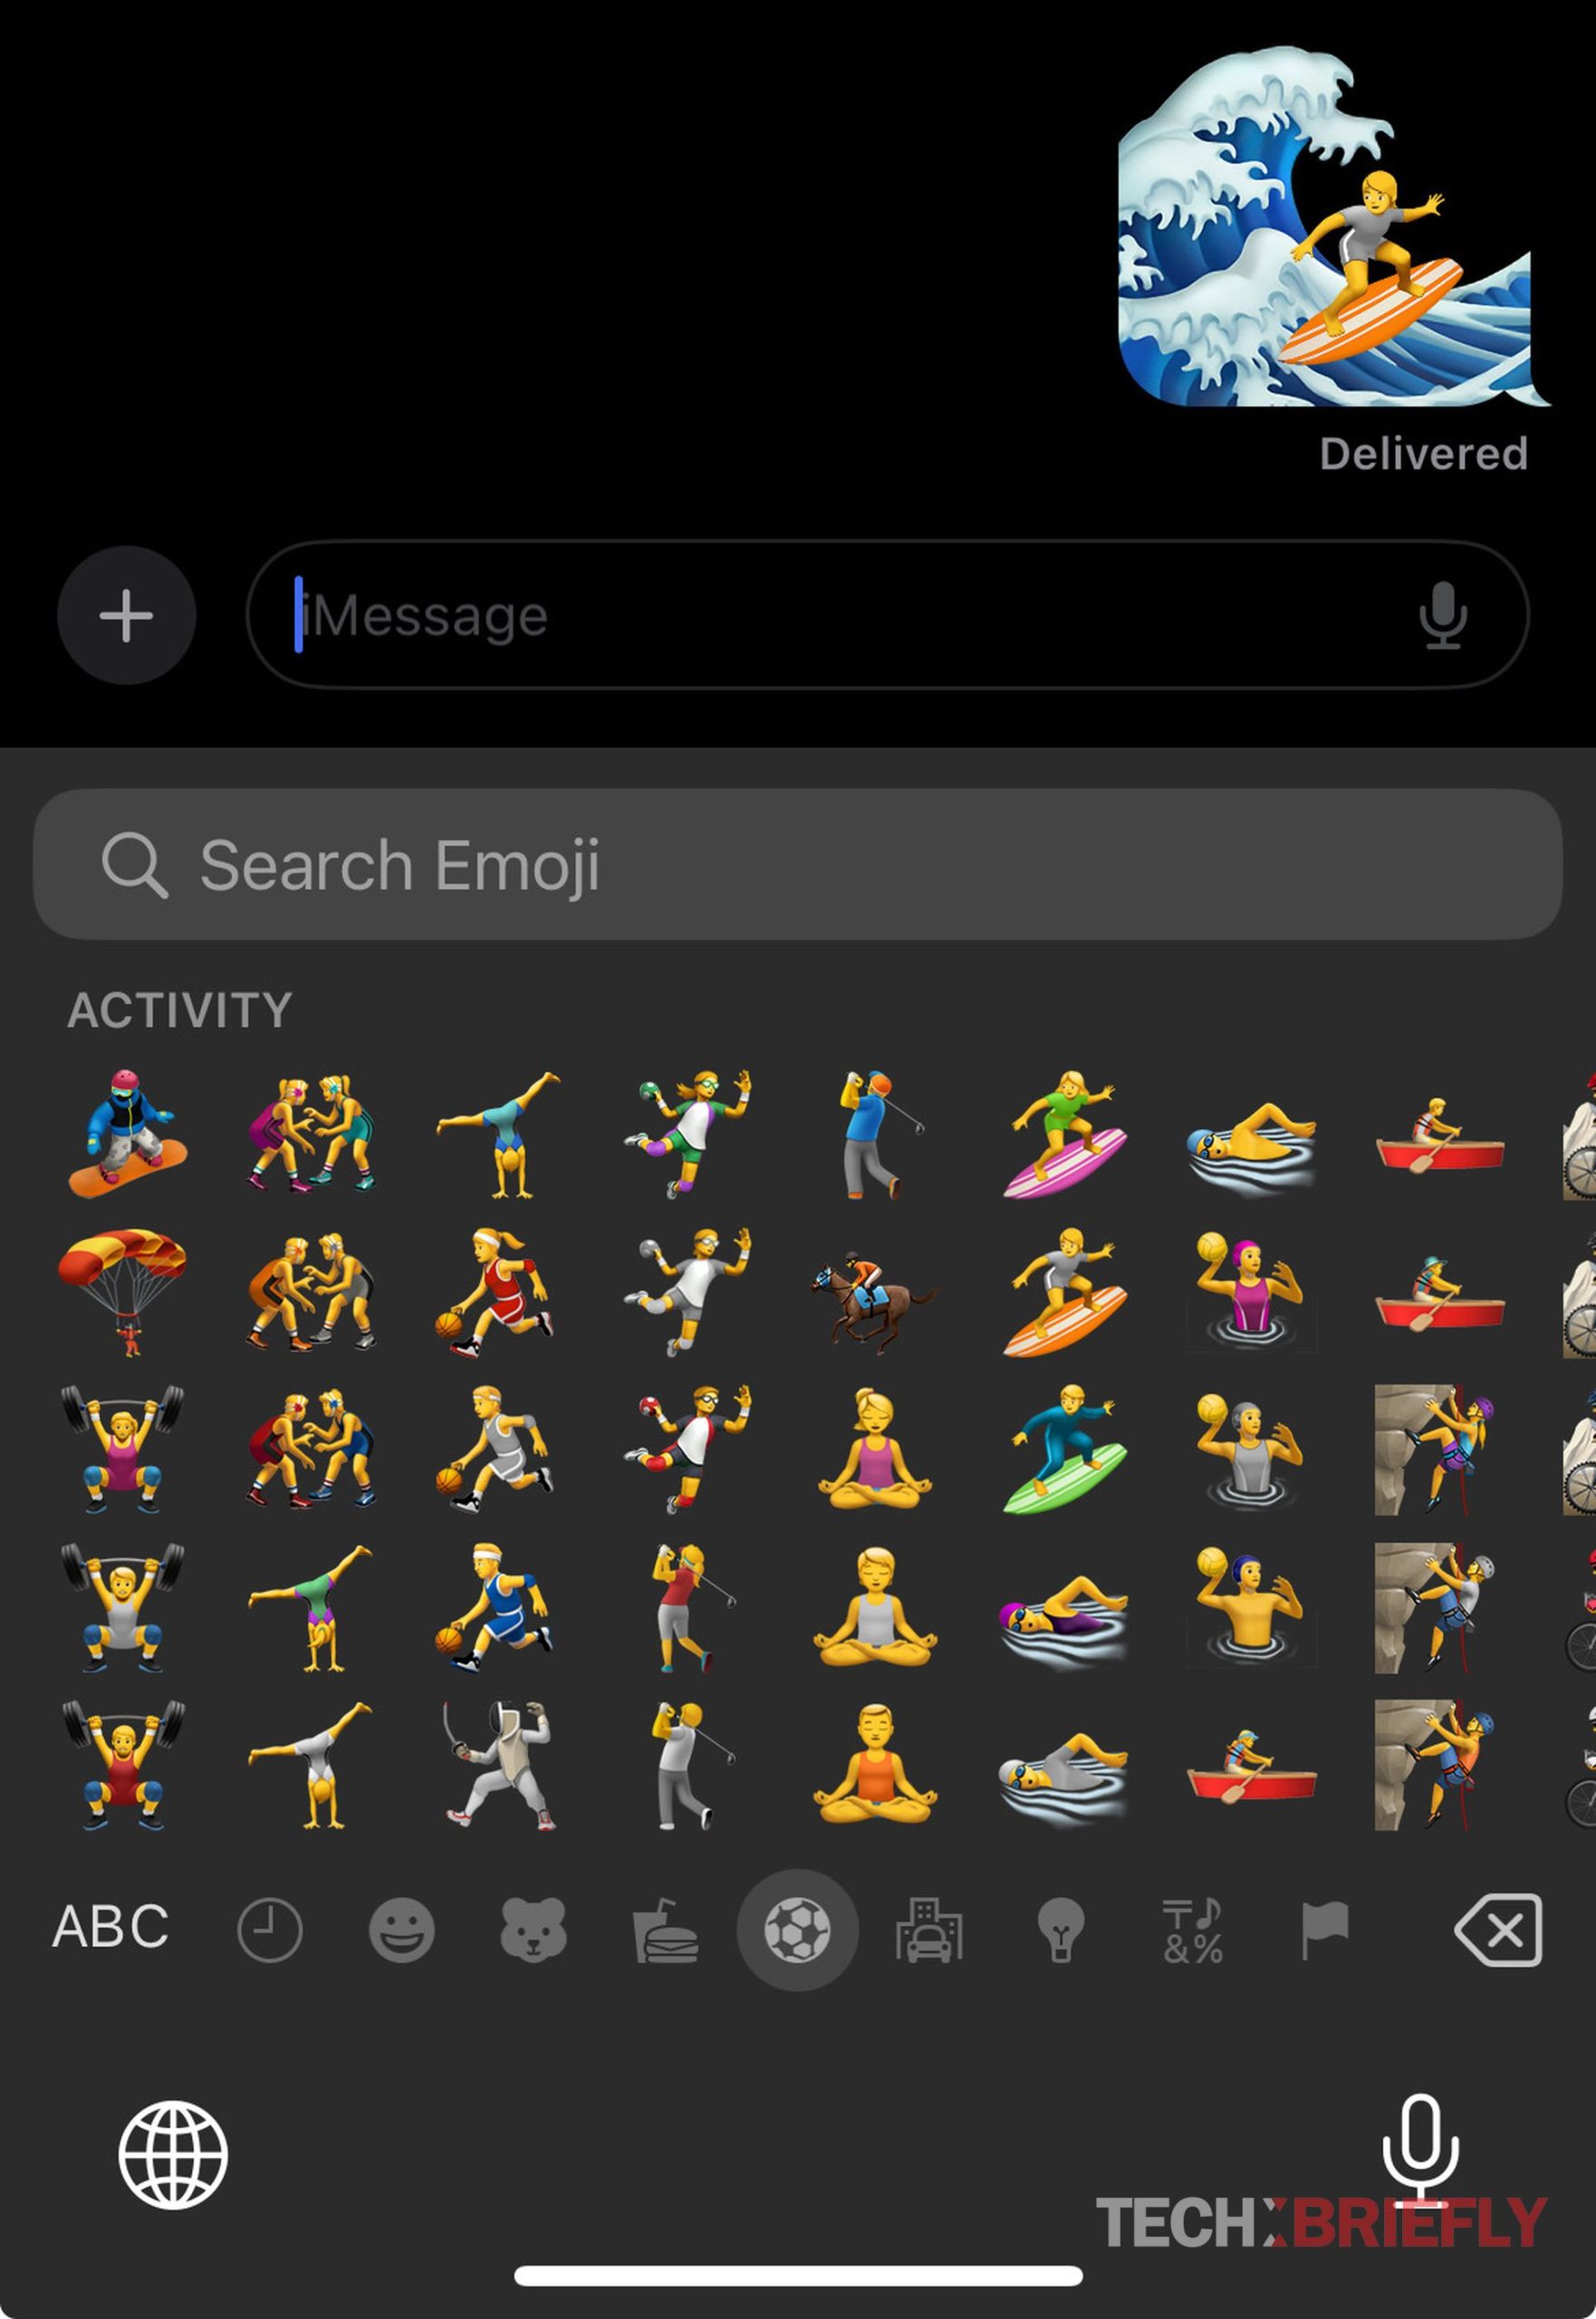 How do you use the iMessage emoji layer feature?